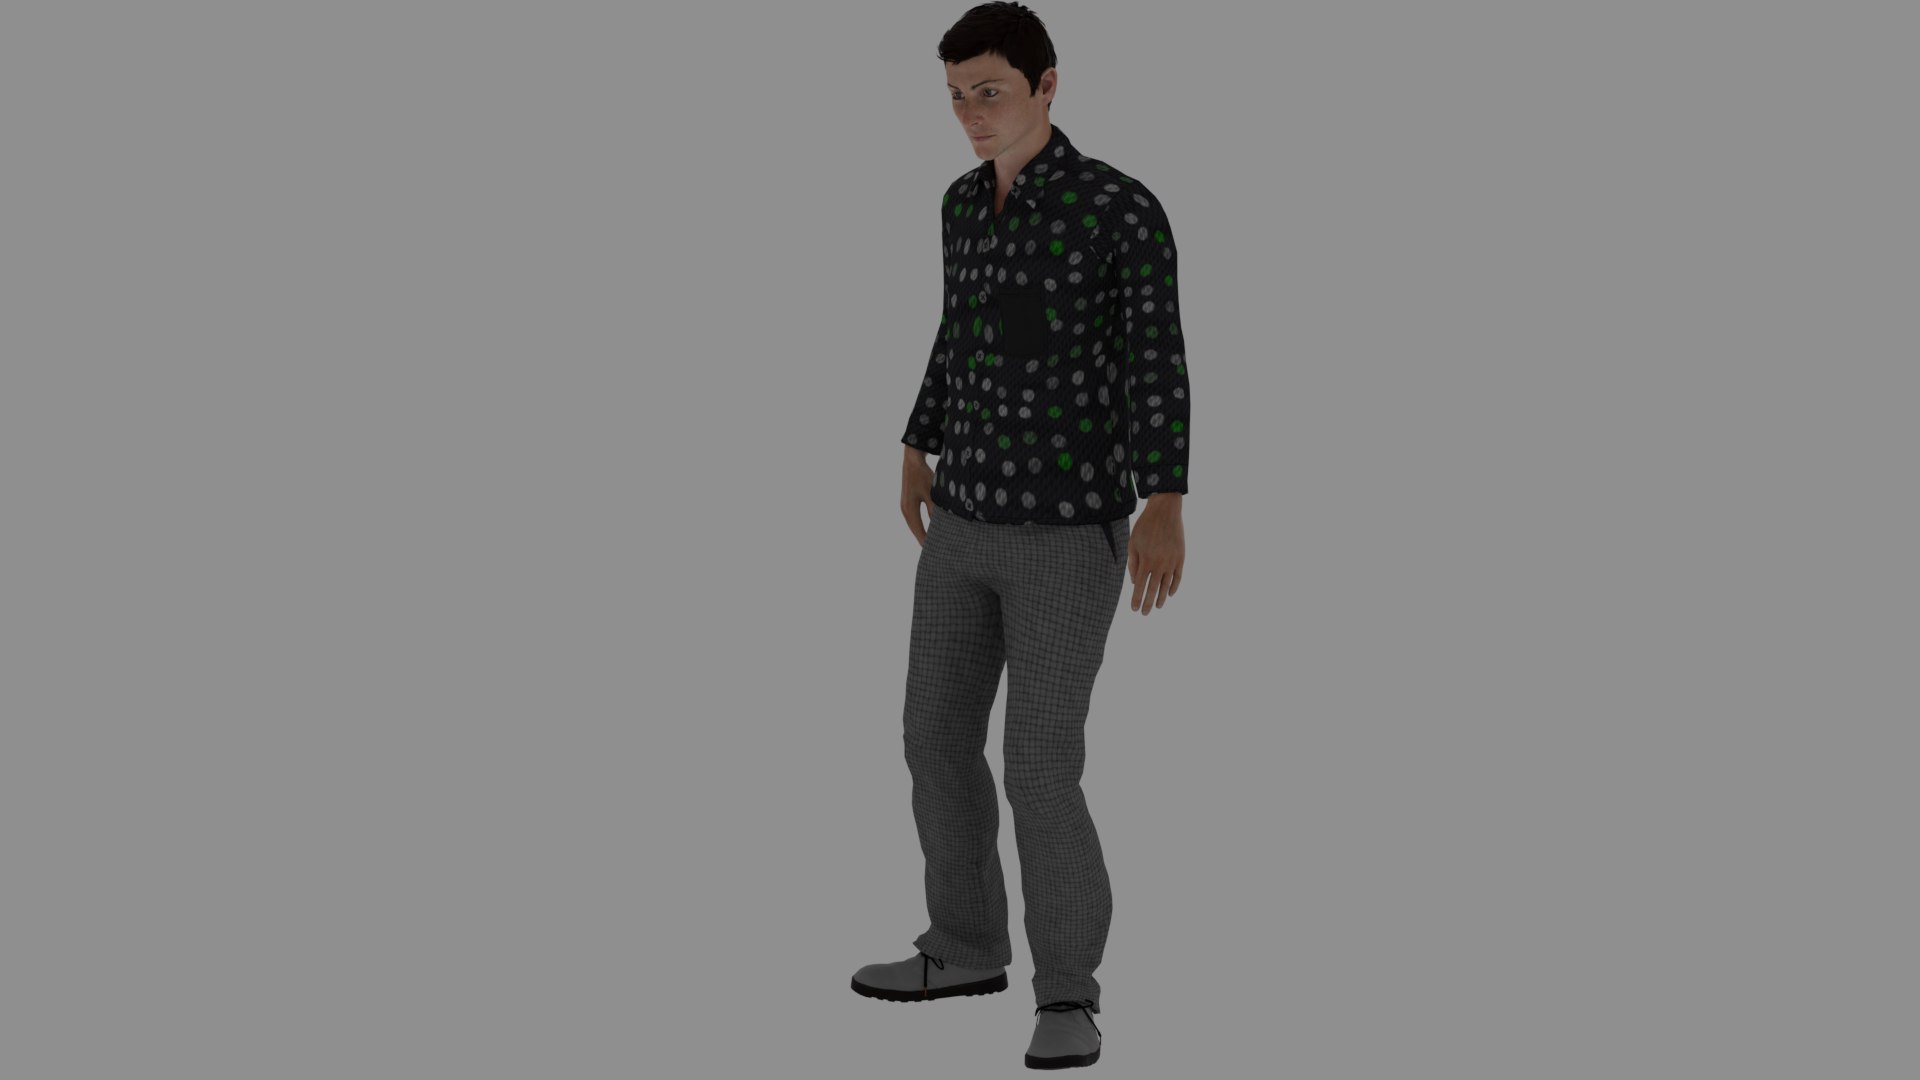 3D character male rigged - TurboSquid 1686747